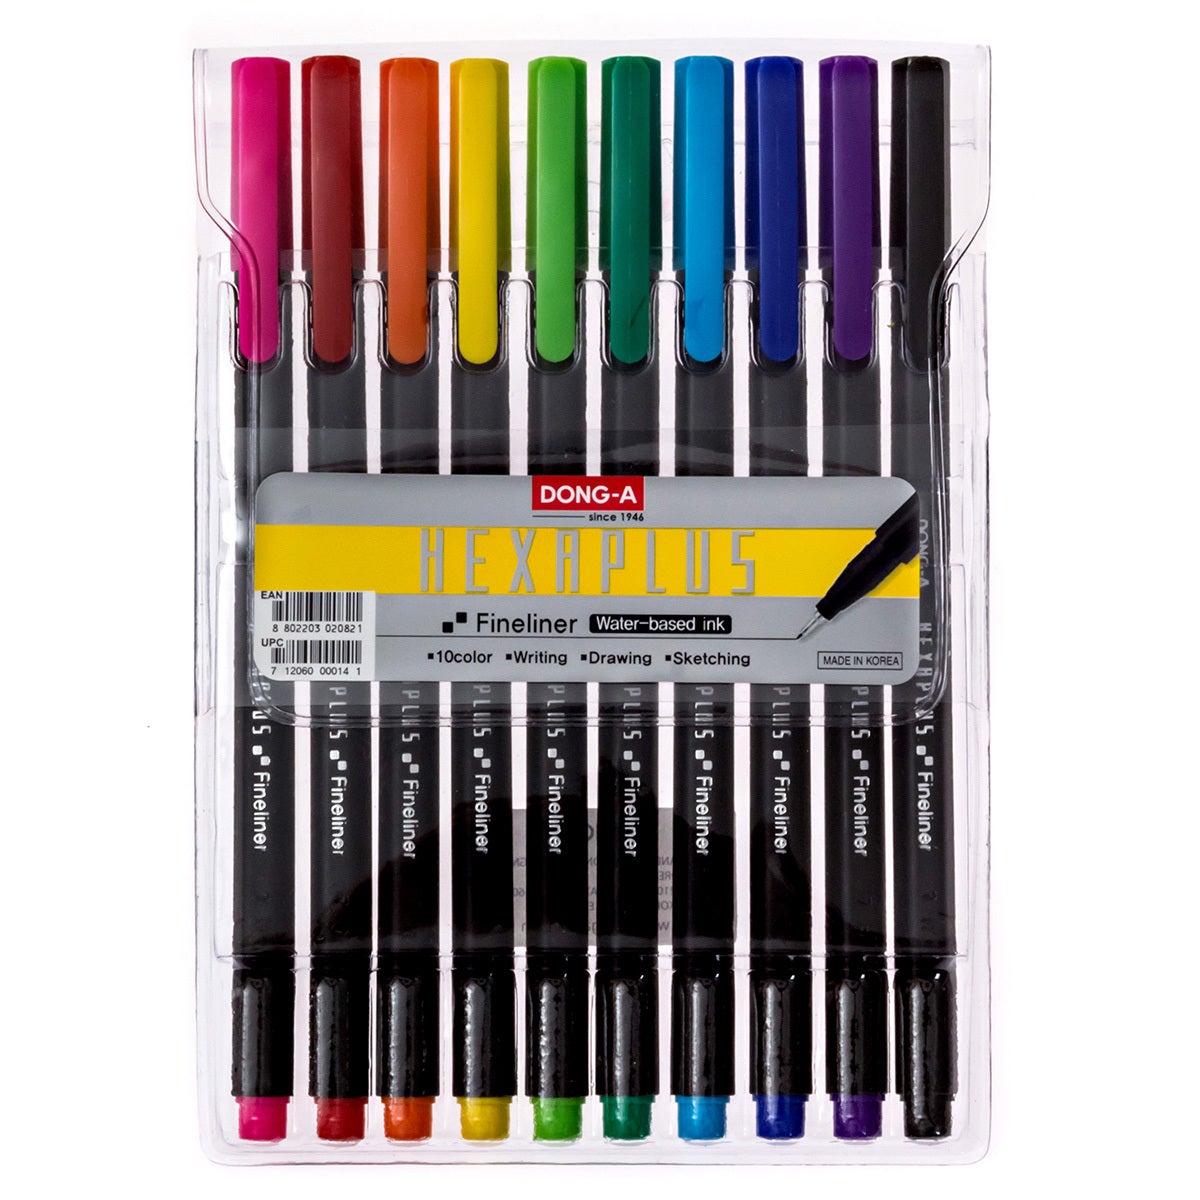 DONG-A Hexaplus Fineliner - 10 Color Set product image 1